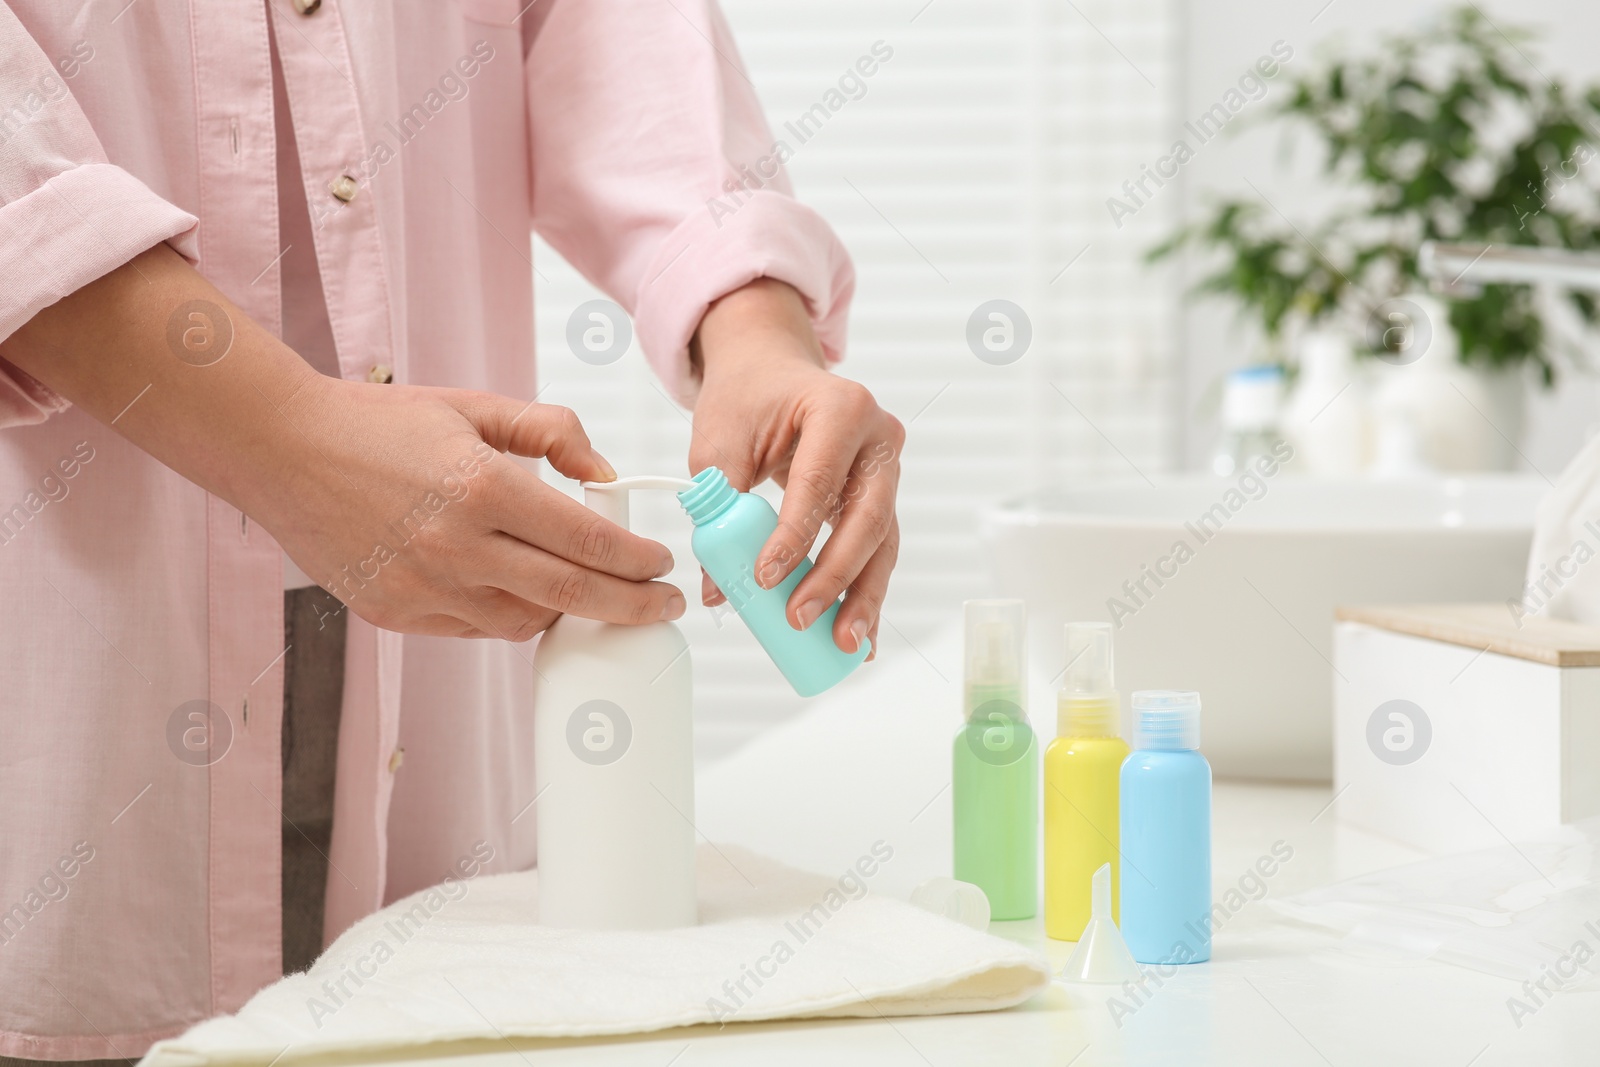 Photo of Woman pouring cosmetic product into plastic bottle at white countertop in bathroom, closeup. Bath accessories